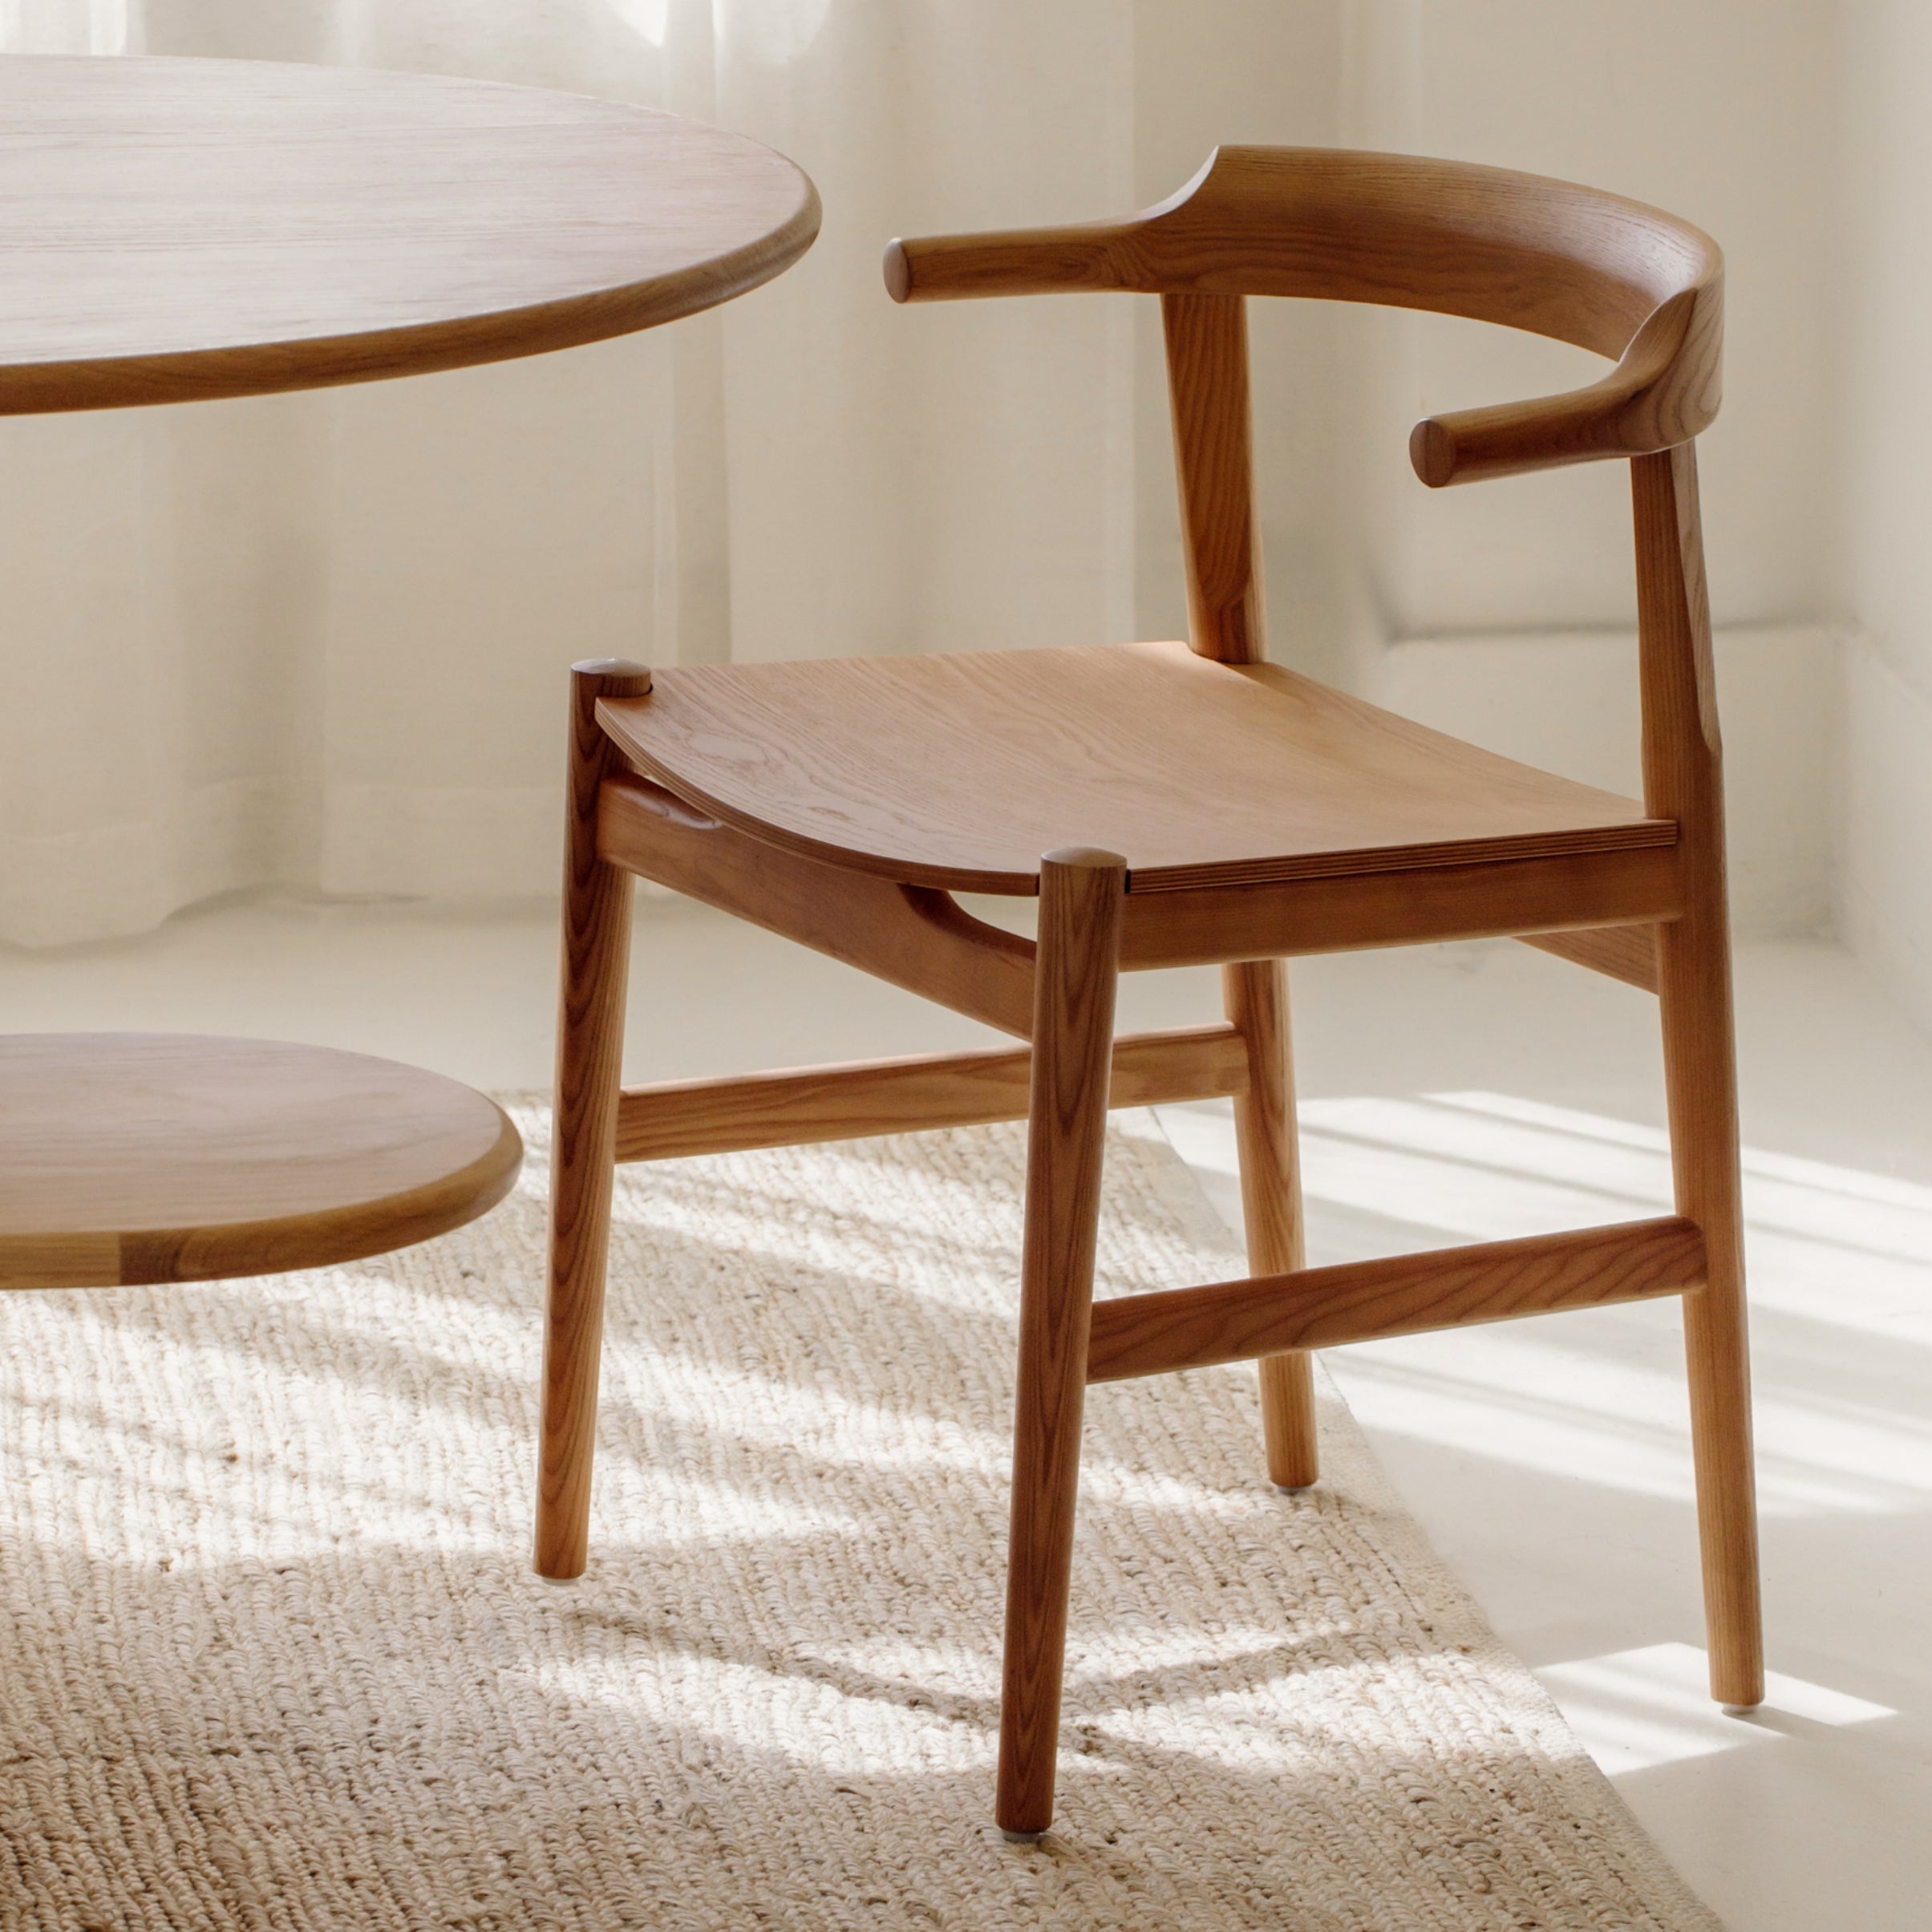 Tuck In Dining Chair, White Oak, Wood Seat - Image 8